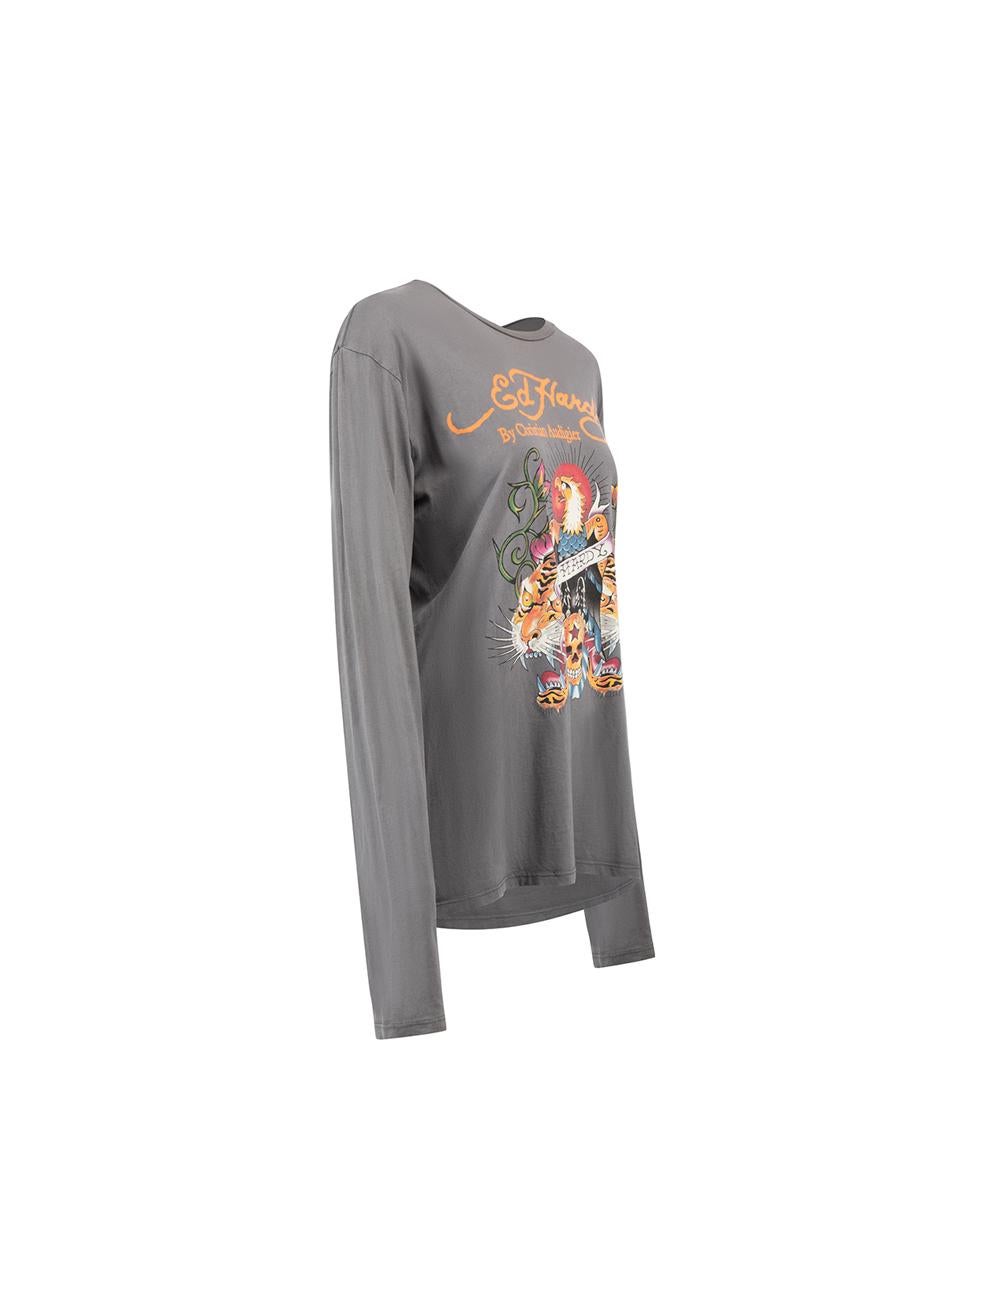 CONDITION is Very good. Minimal wear to top is evident. Minimal discoloured mark and small hole on back of right sleeve on this used Ed Hardy designer resale item.



Details


Grey

Cotton

Long sleeves top

Stretchy

Graphic print

Round